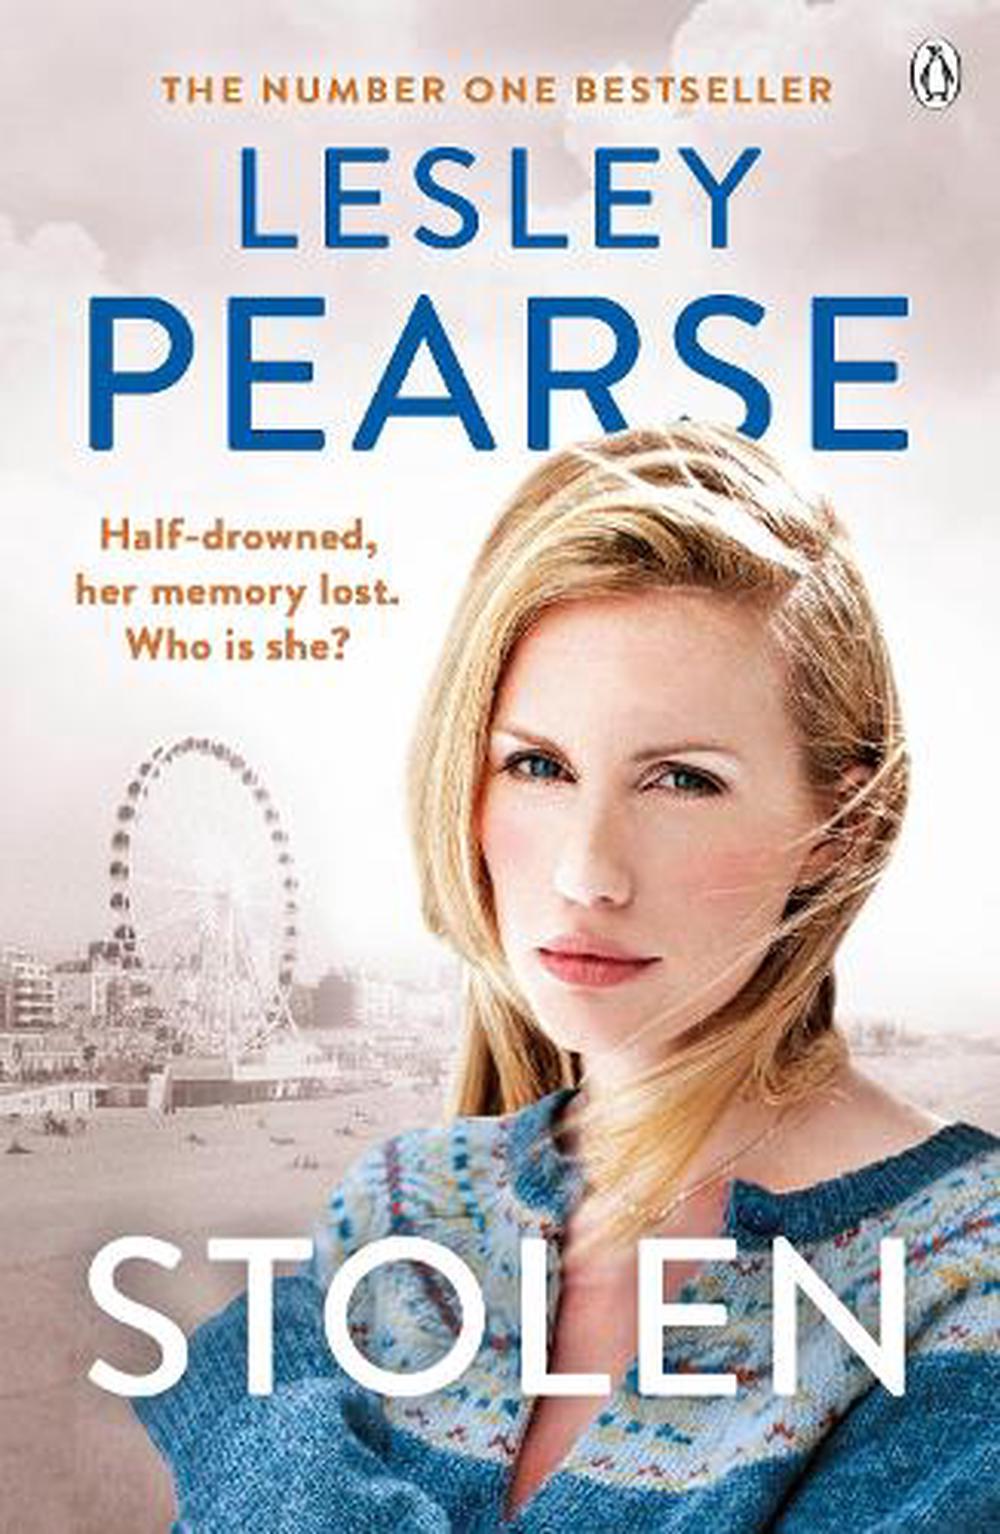 Stolen by Lesley Pearse, Paperback, 9780141030500 | Buy online at The Nile